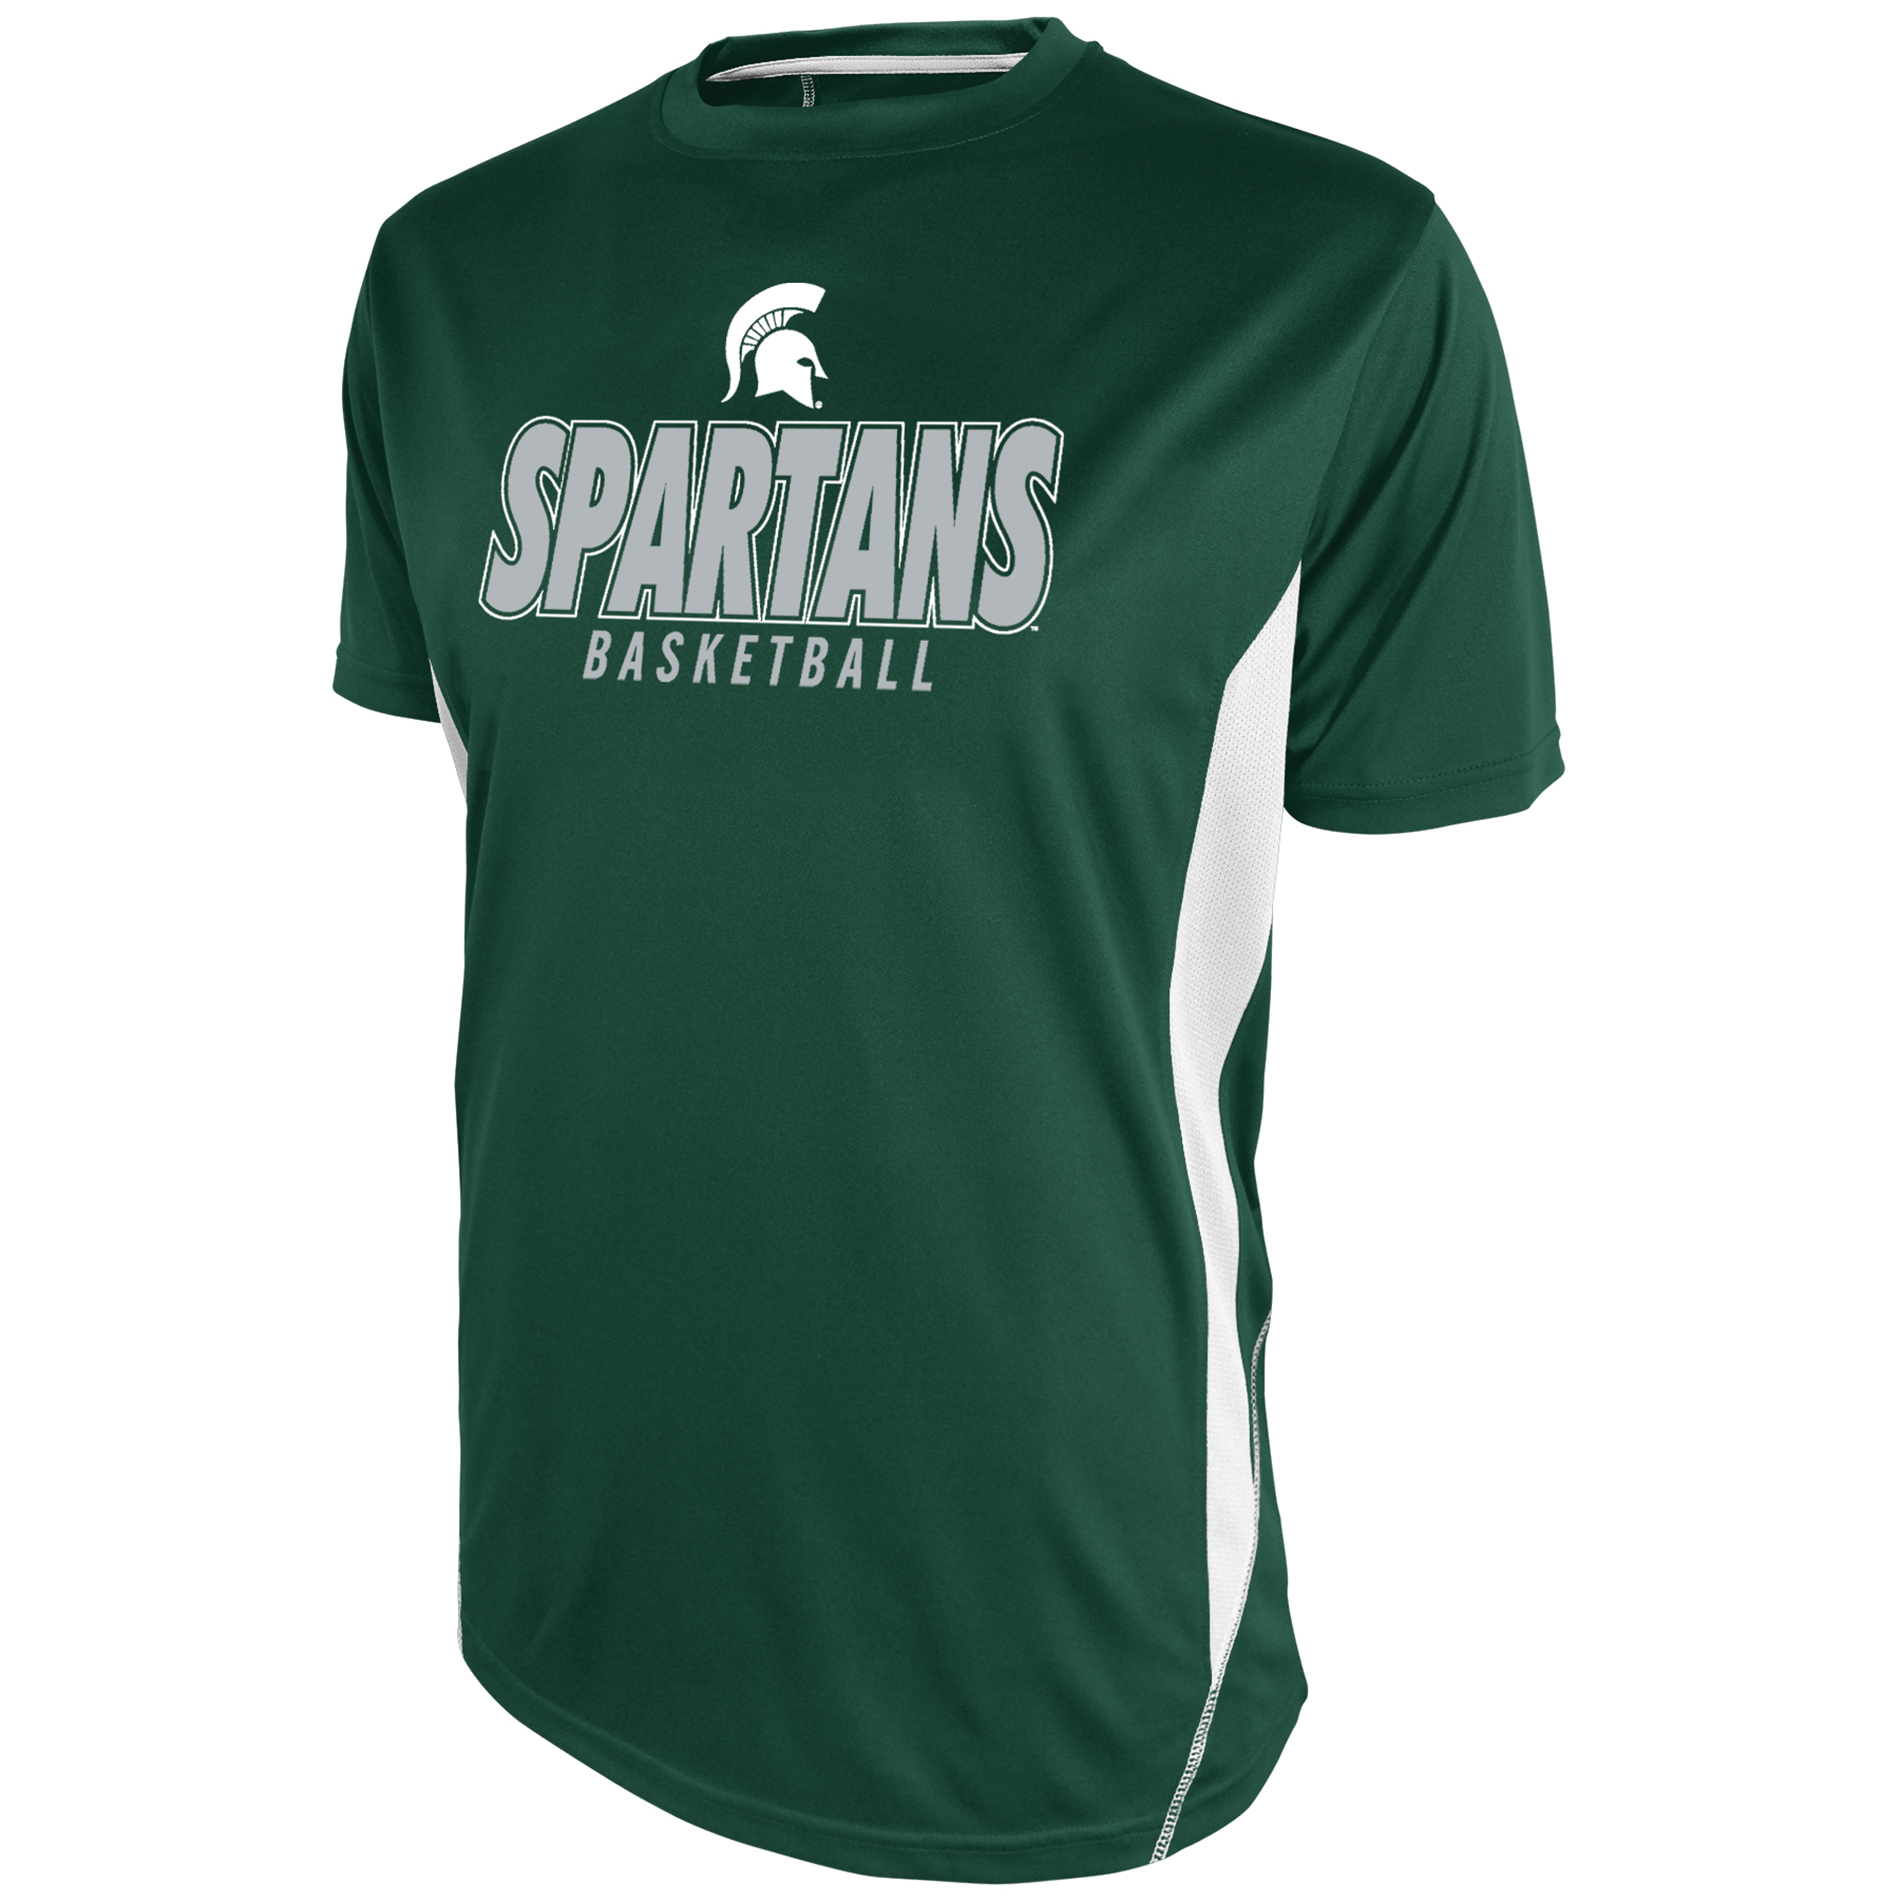 NCAA Men's Michigan State Spartans Short Sleeve Athletic Tee